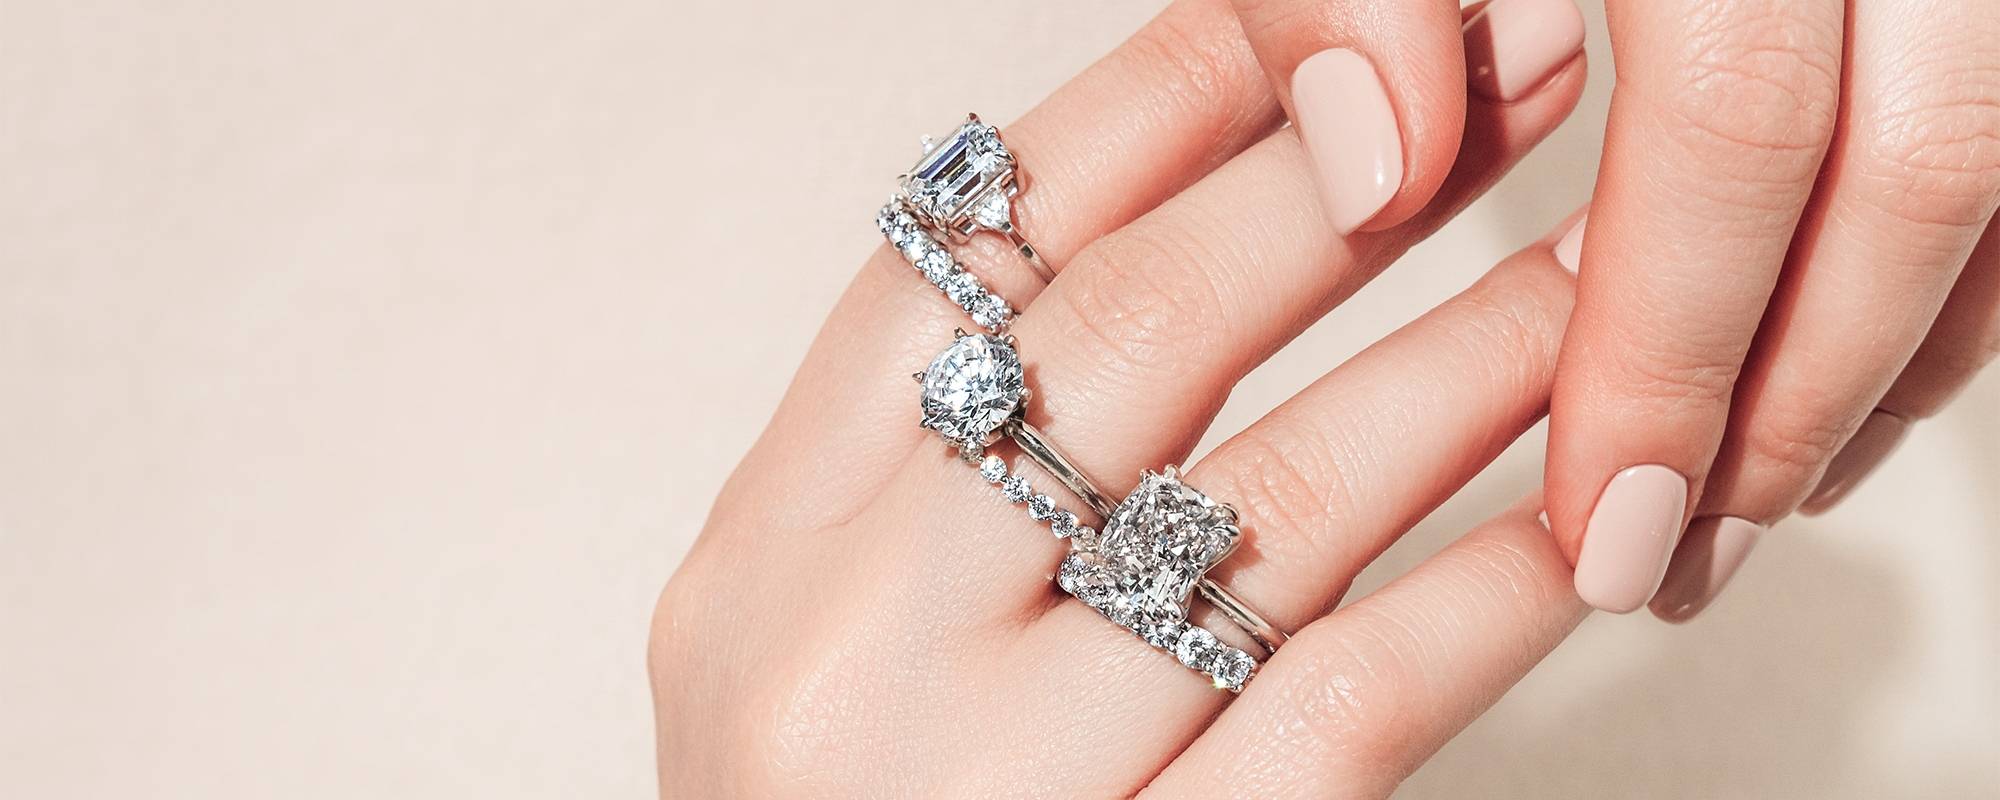 Just visually, does this ring look too big to you? : r/EngagementRings